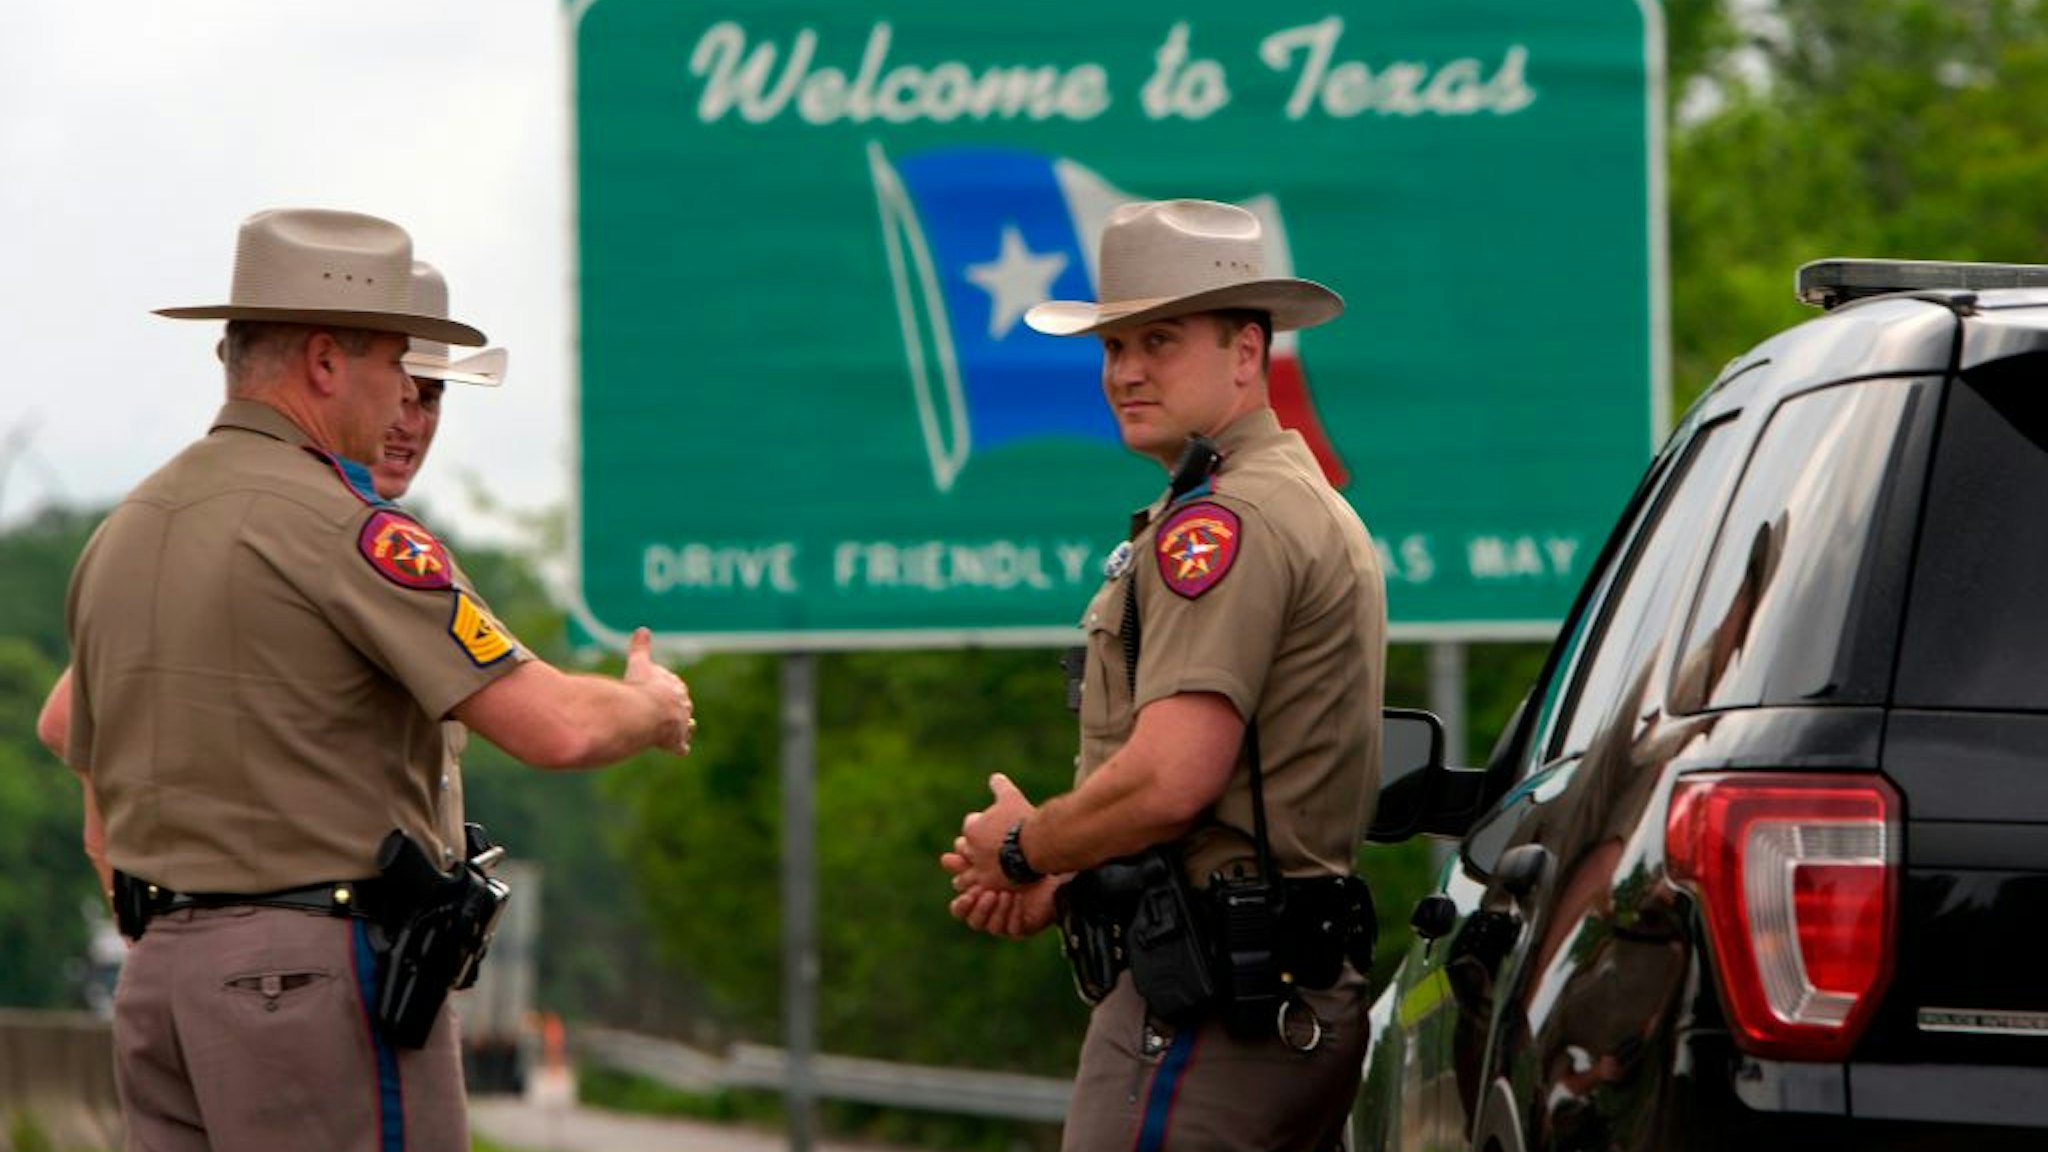 Texas State troopers patrol I-10 across the border from Louisiana on March 30, 2020 in Orange, Texas.